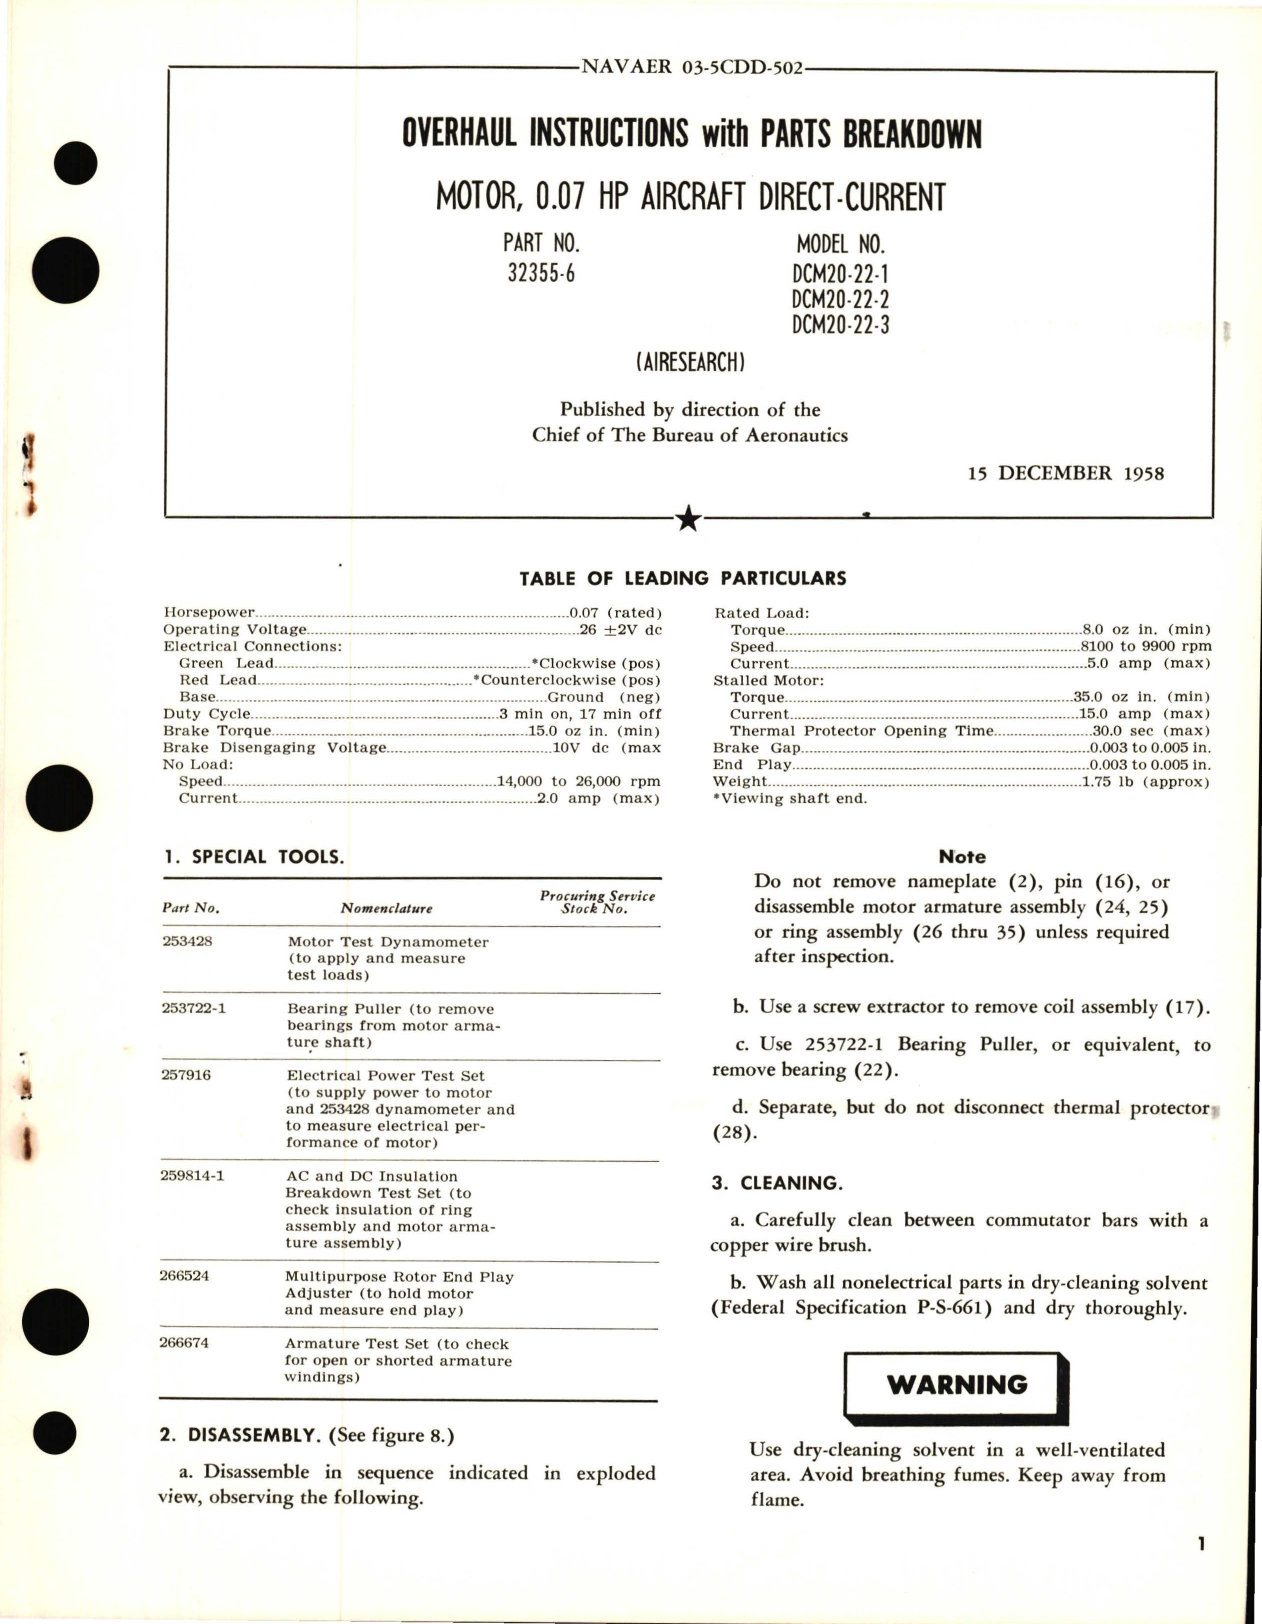 Sample page 1 from AirCorps Library document: Overhaul Instructions with Parts Breakdown for Motor, 0.07 HP Aircraft Direct Current - Part 32355-6